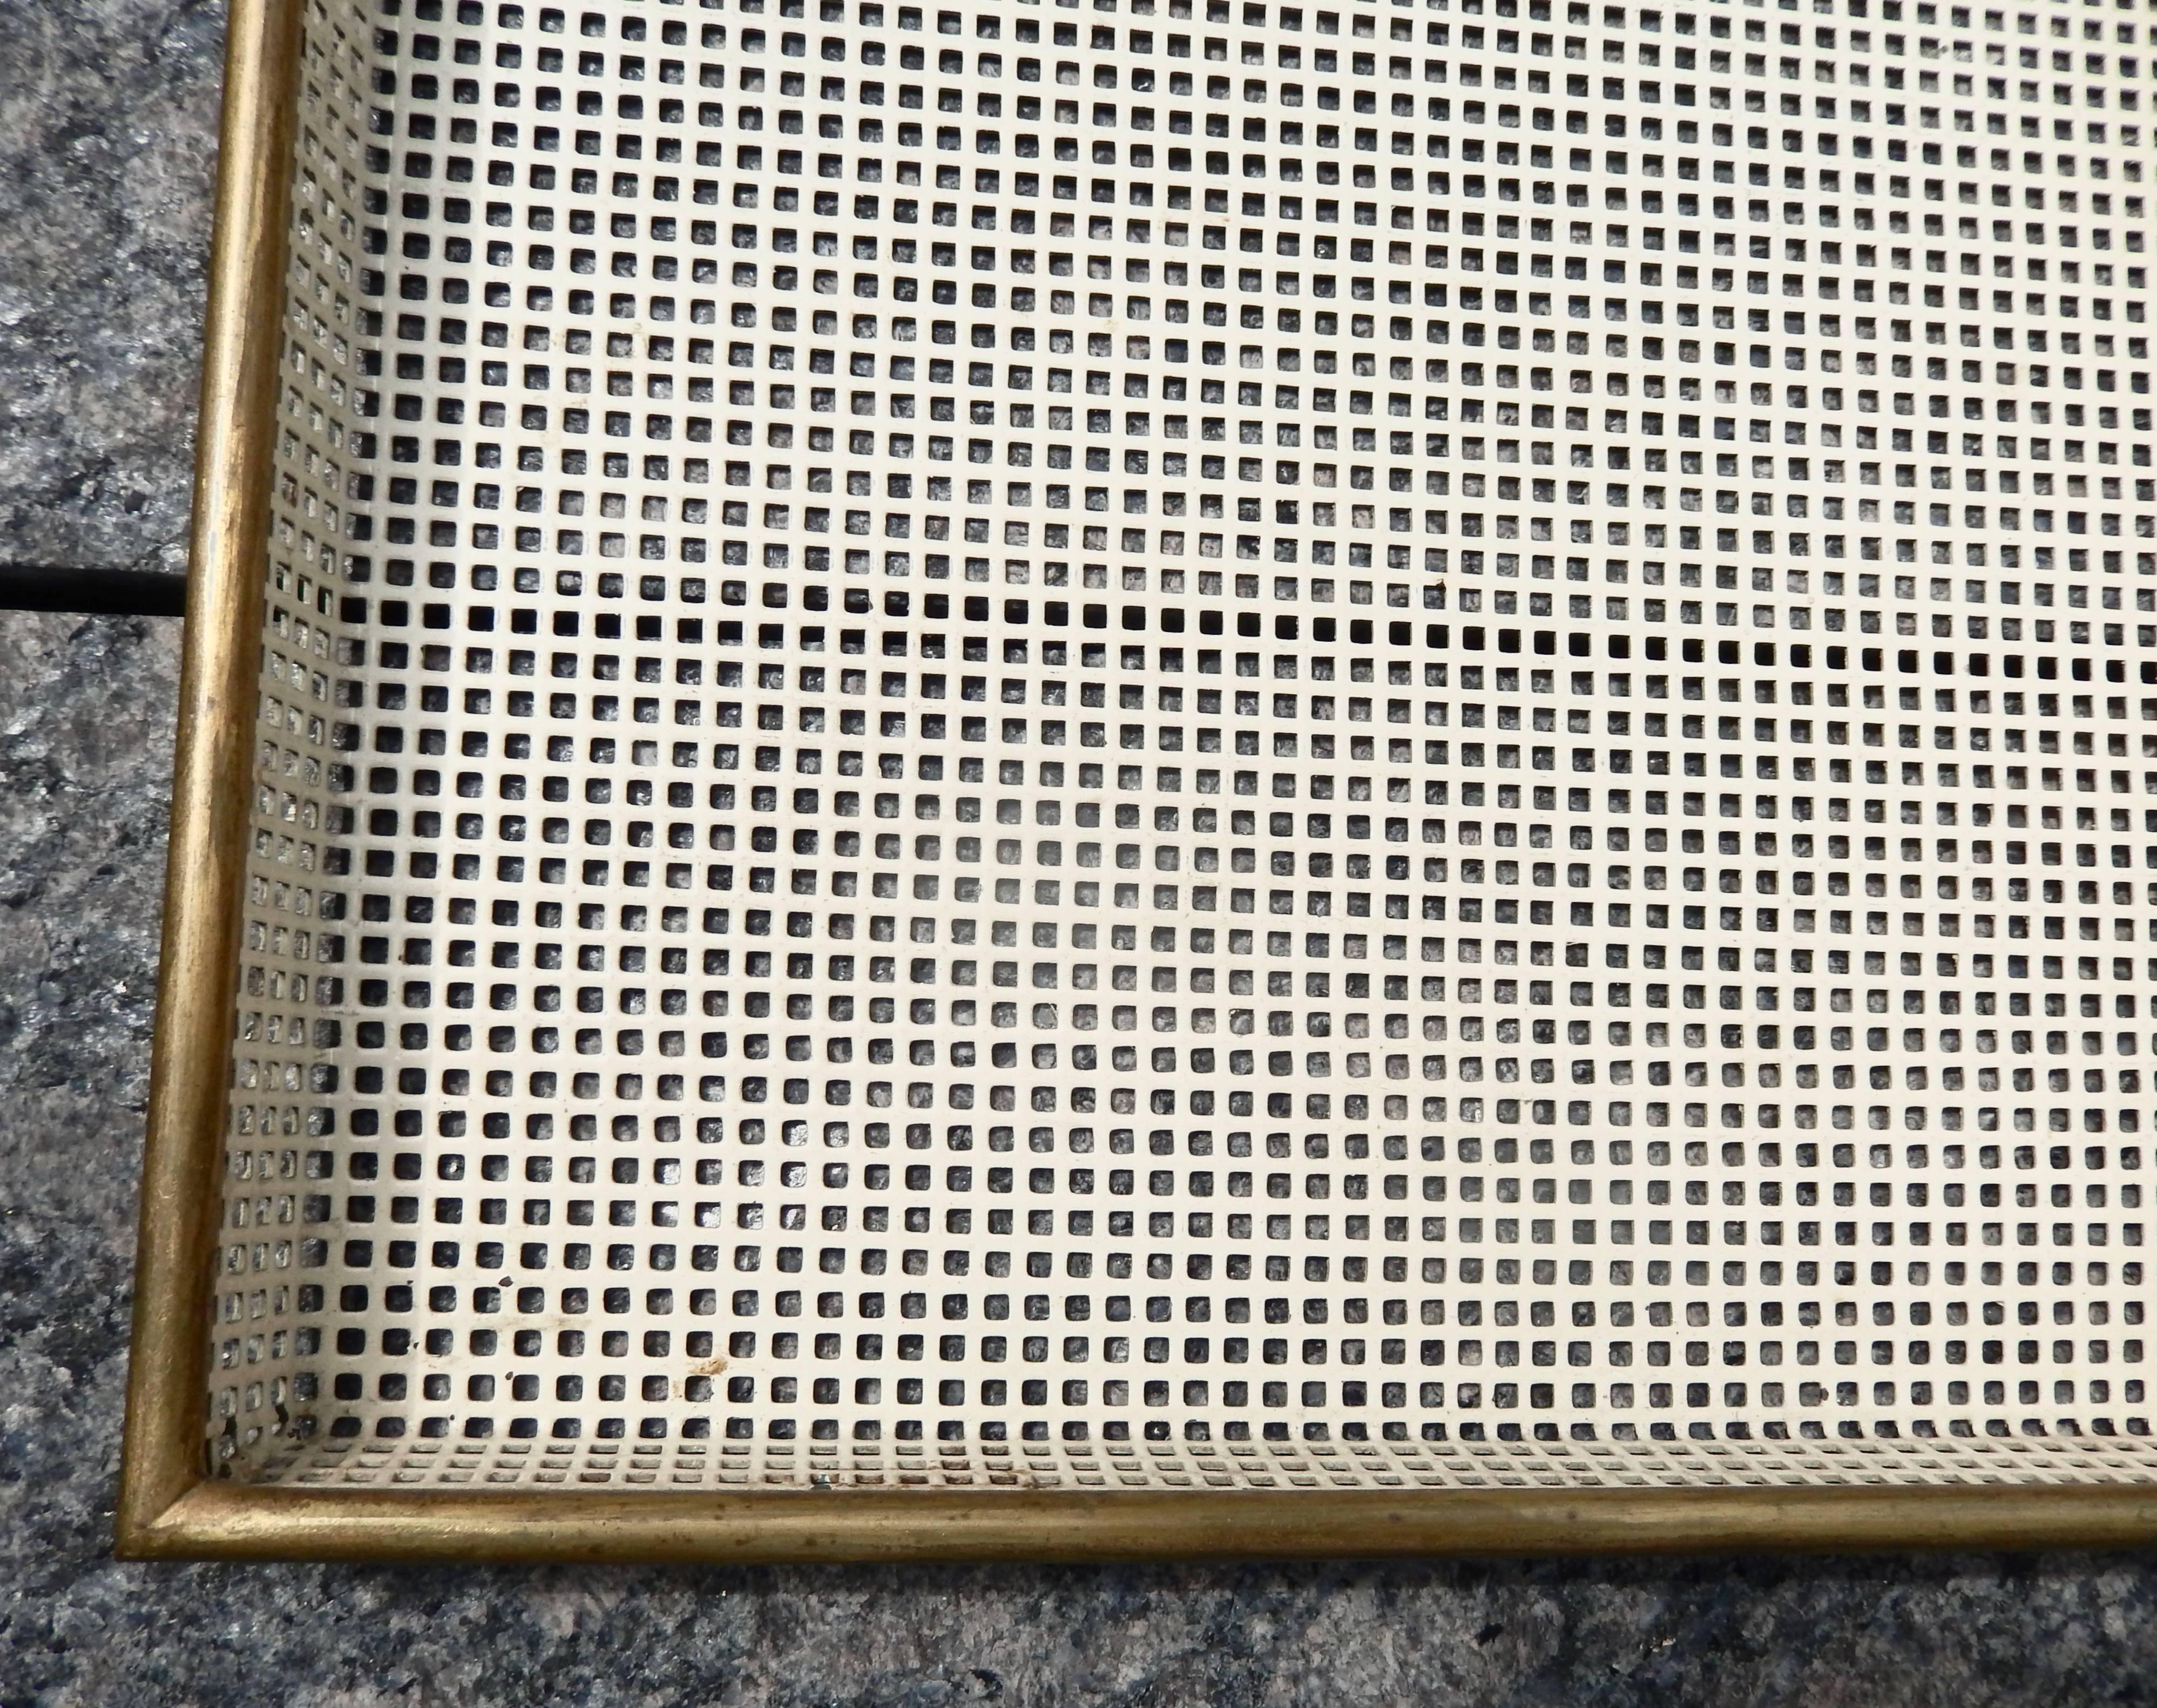 Enameled Rare Mid-Century Perforated Metal Tray by Mathieu Matégot